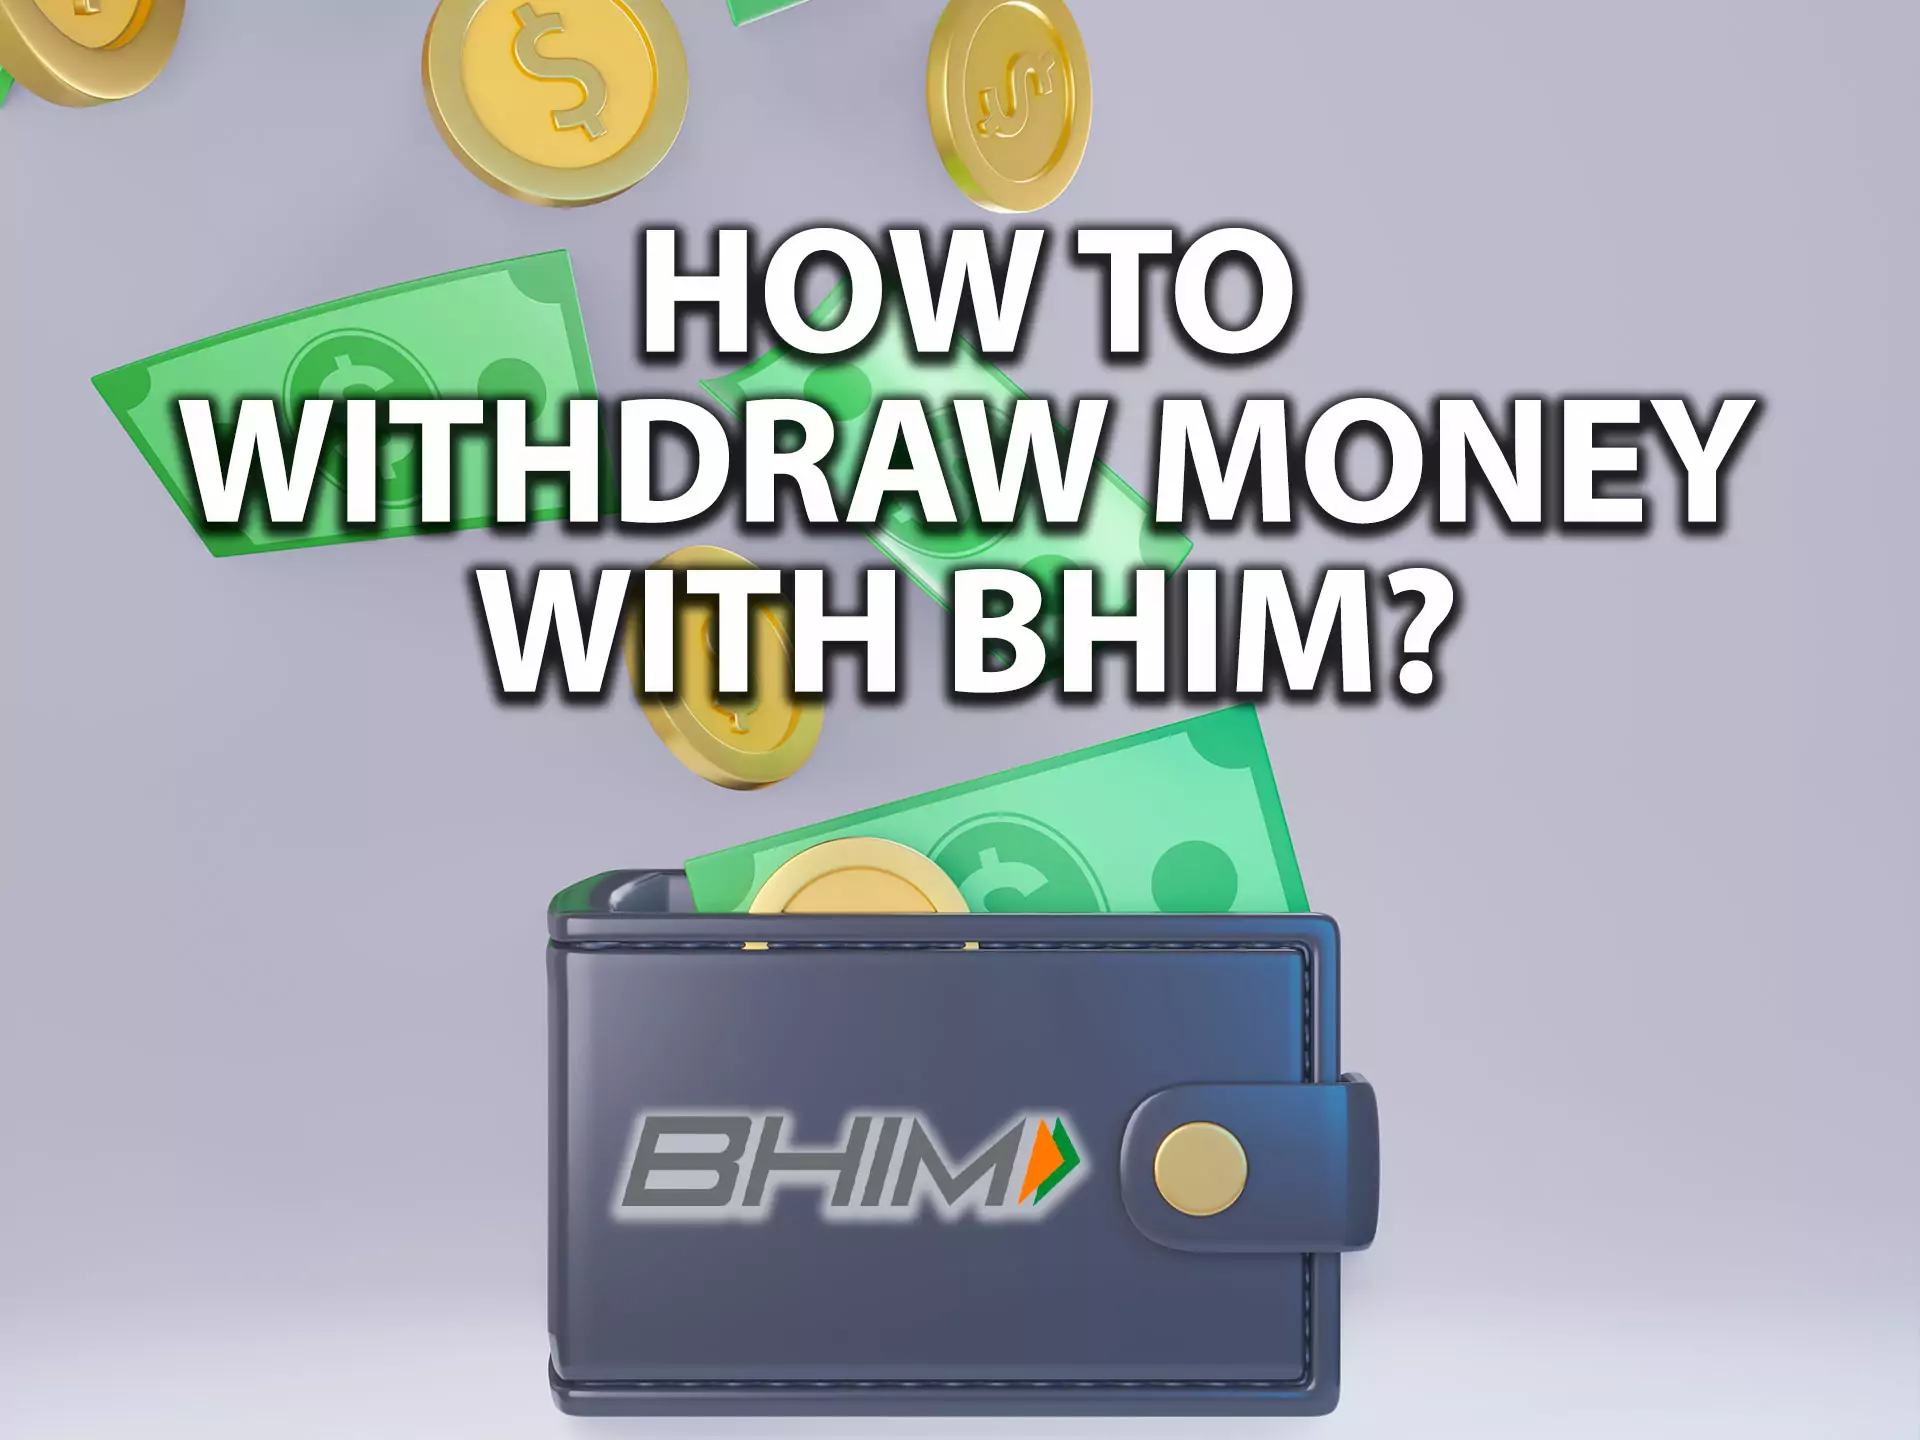 You can easily withdraw money from BHIM to your bank account.